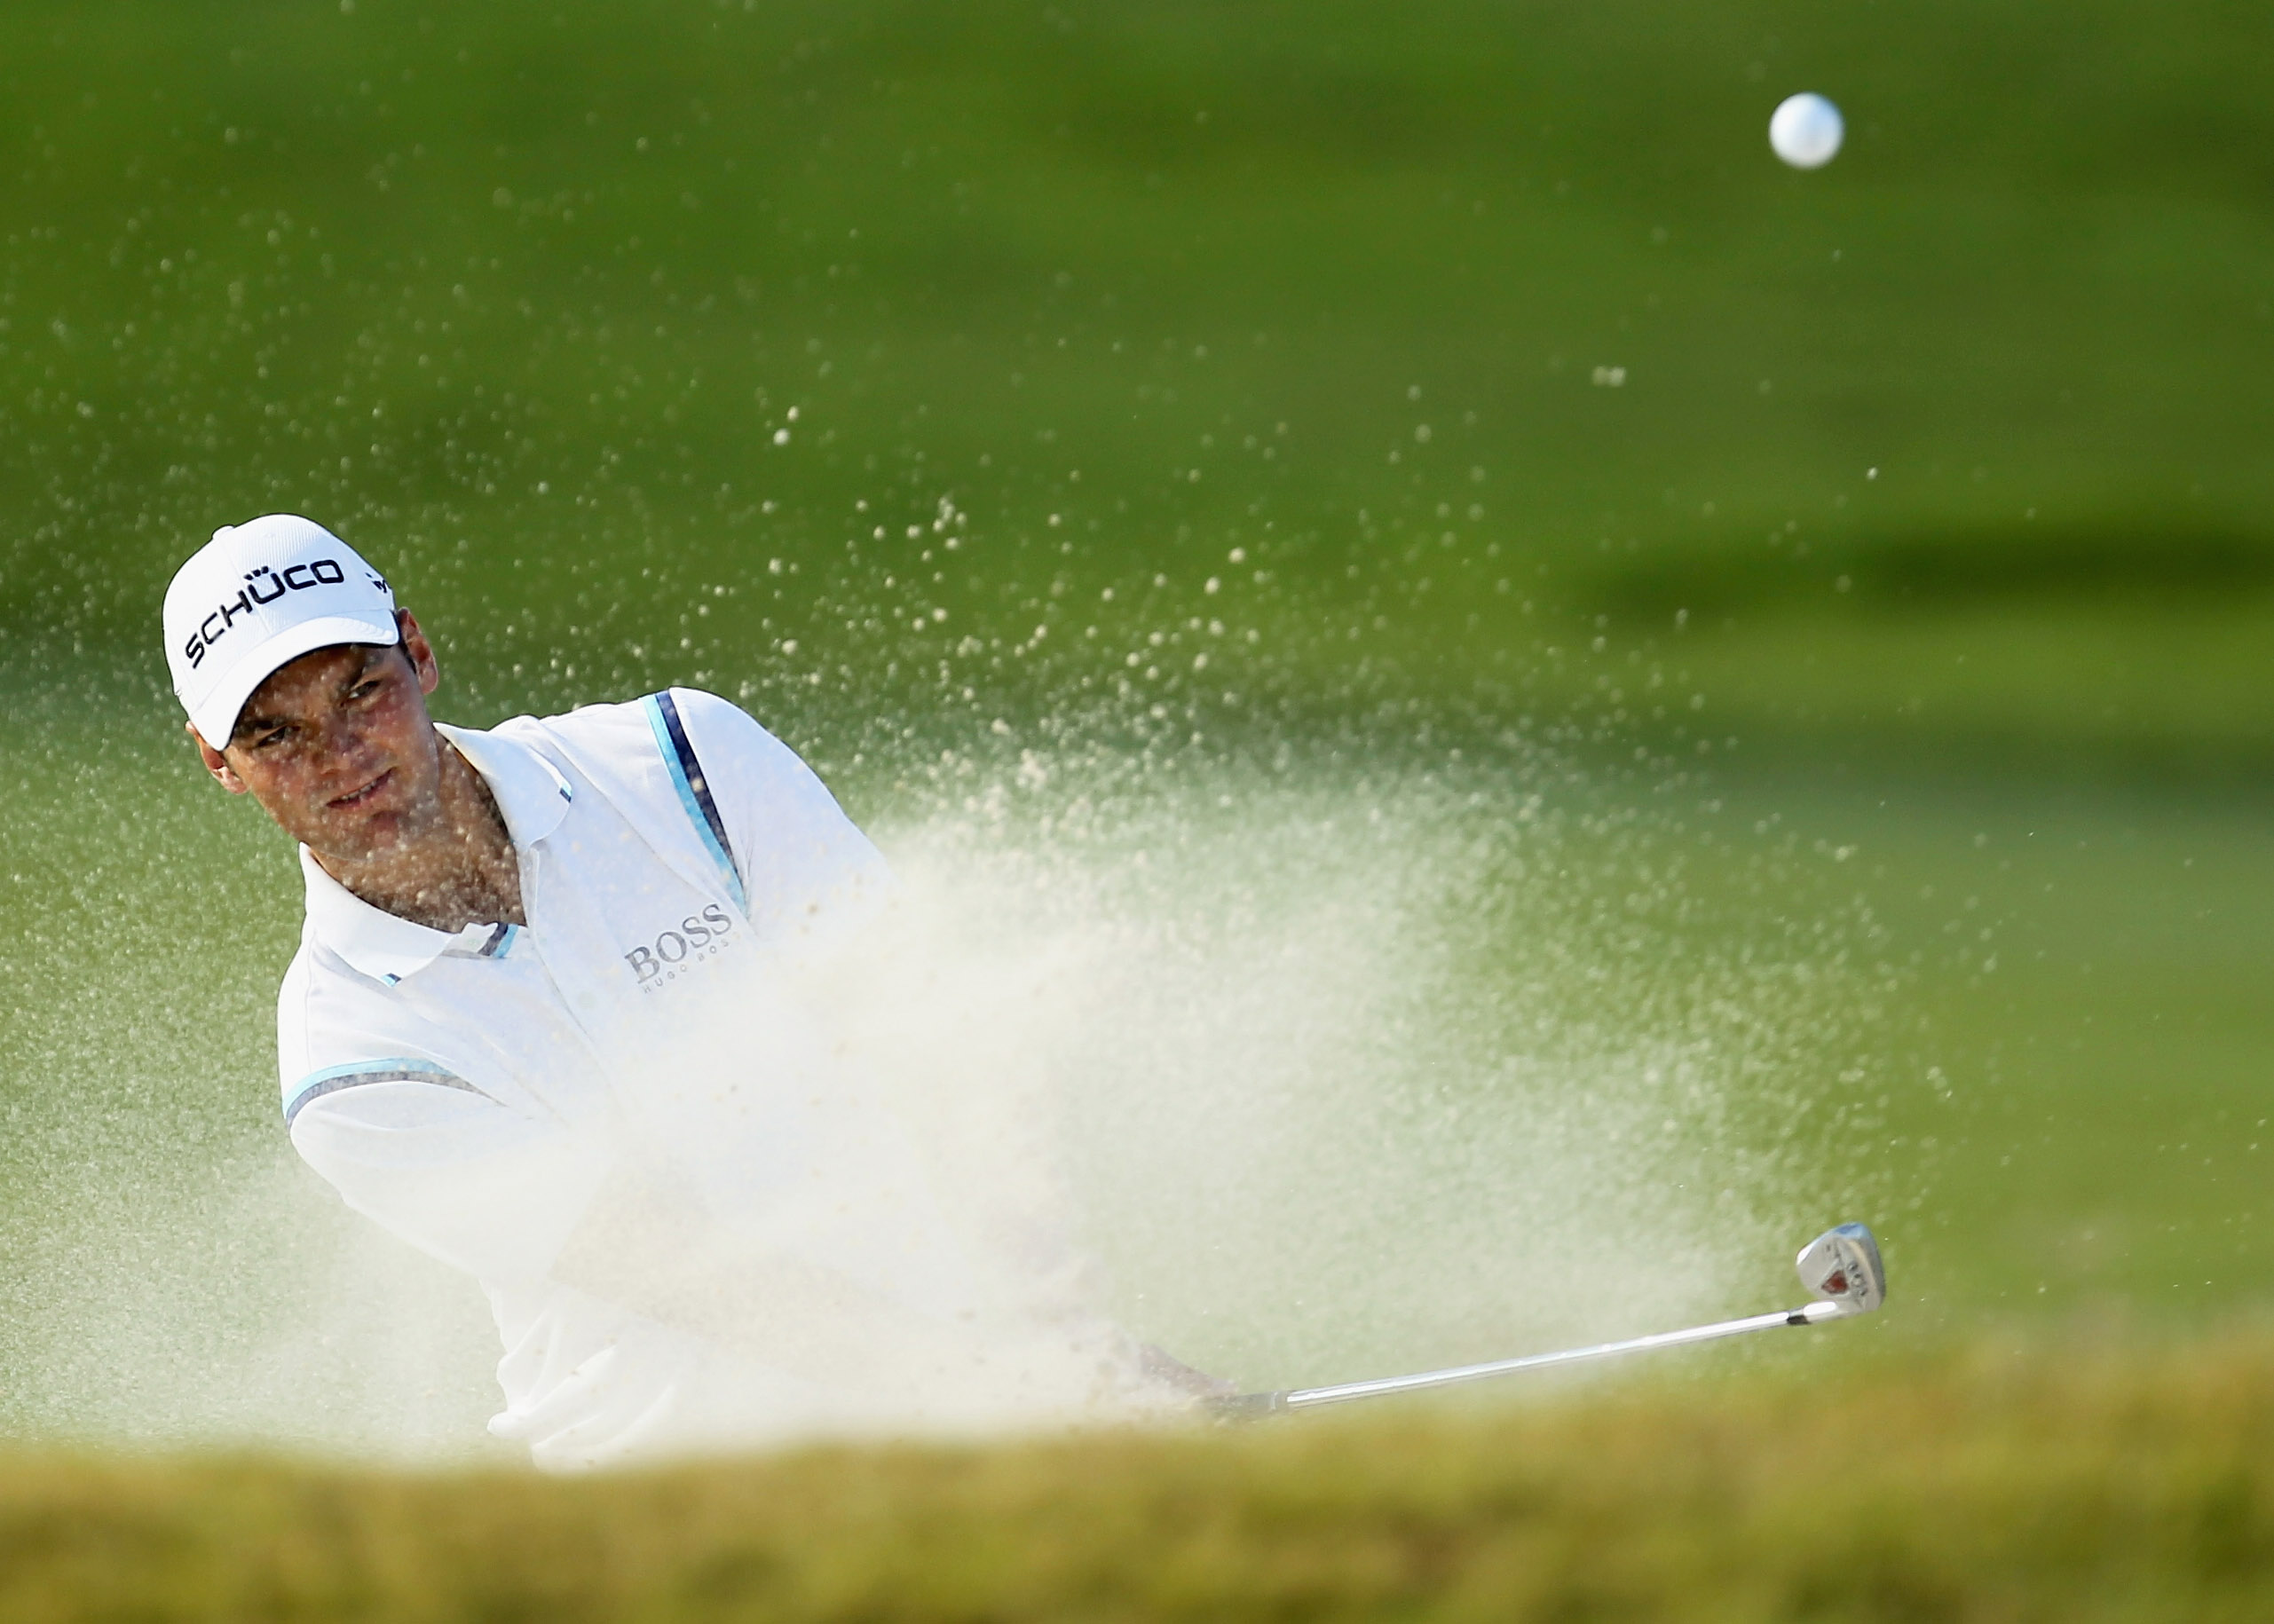 DORAL, FL - MARCH 12:  Martin Kaymer of Germany hits a bunker shot on the 16th hole during the third round of the 2011 WGC- Cadillac Championship at the TPC Blue Monster at the Doral Golf Resort and Spa on March 12, 2011 in Doral, Florida.  (Photo by Mike